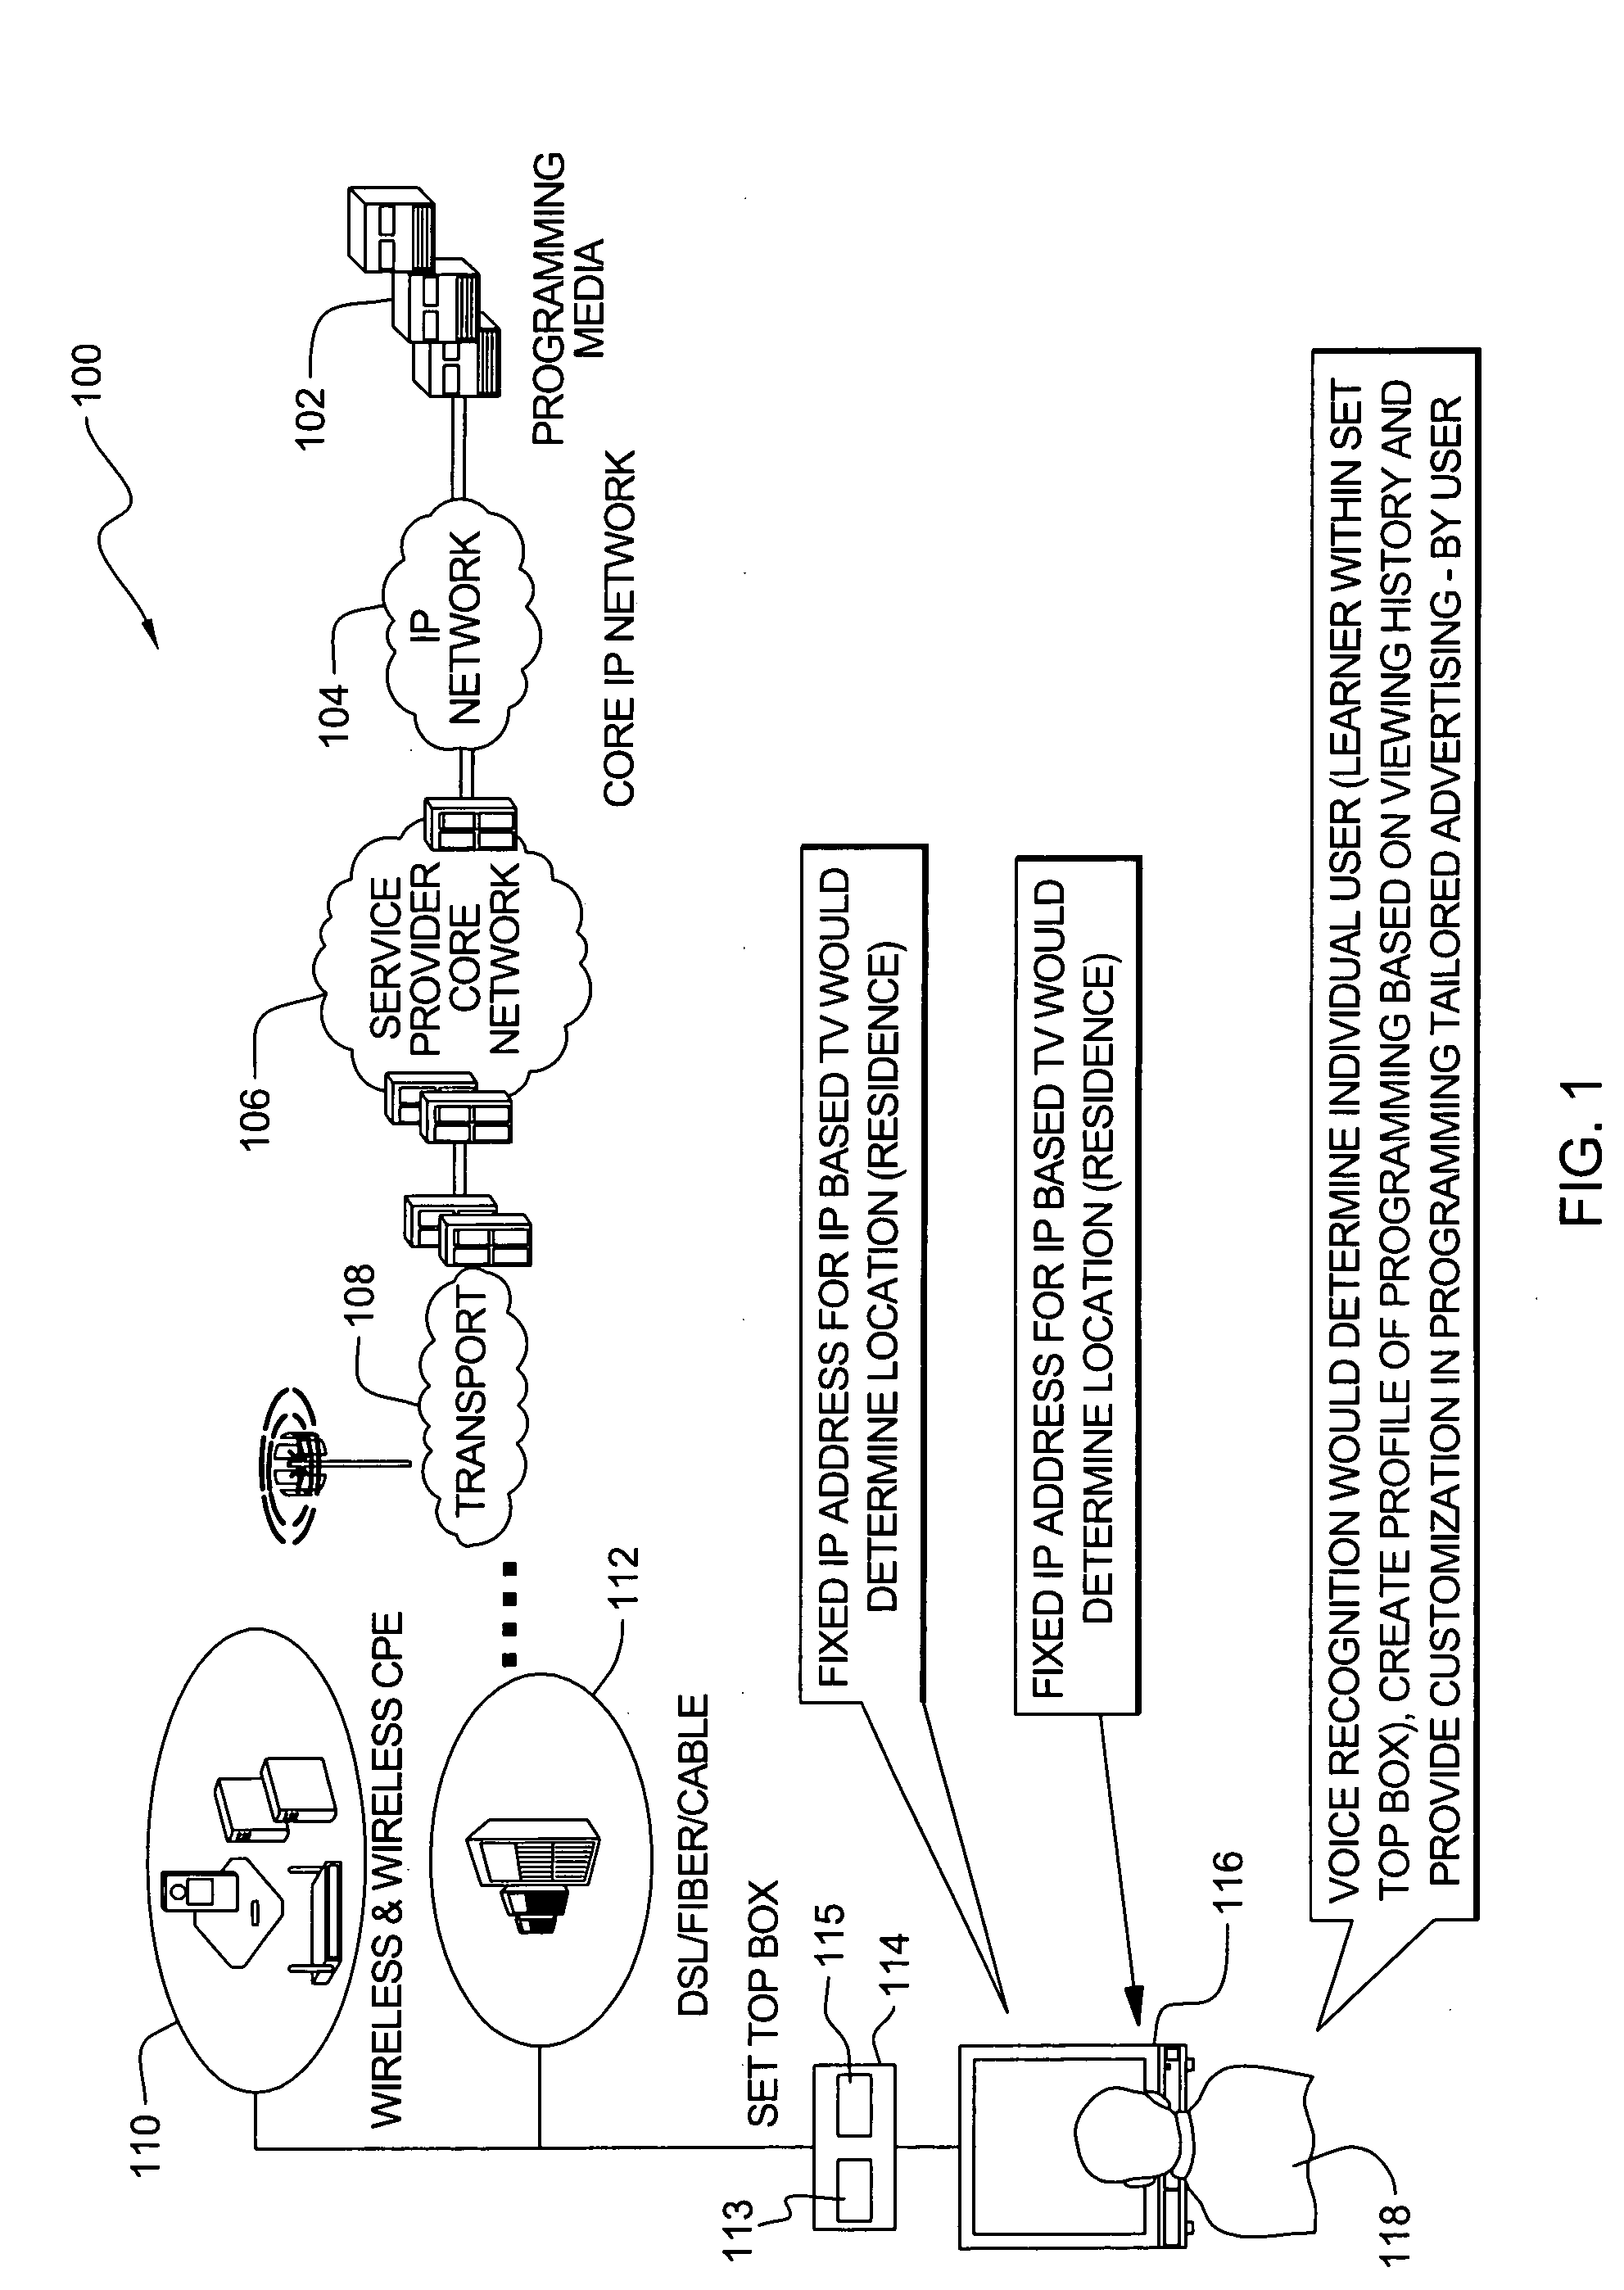 System, method and program product for customizing presentation of television content to a specific viewer and location